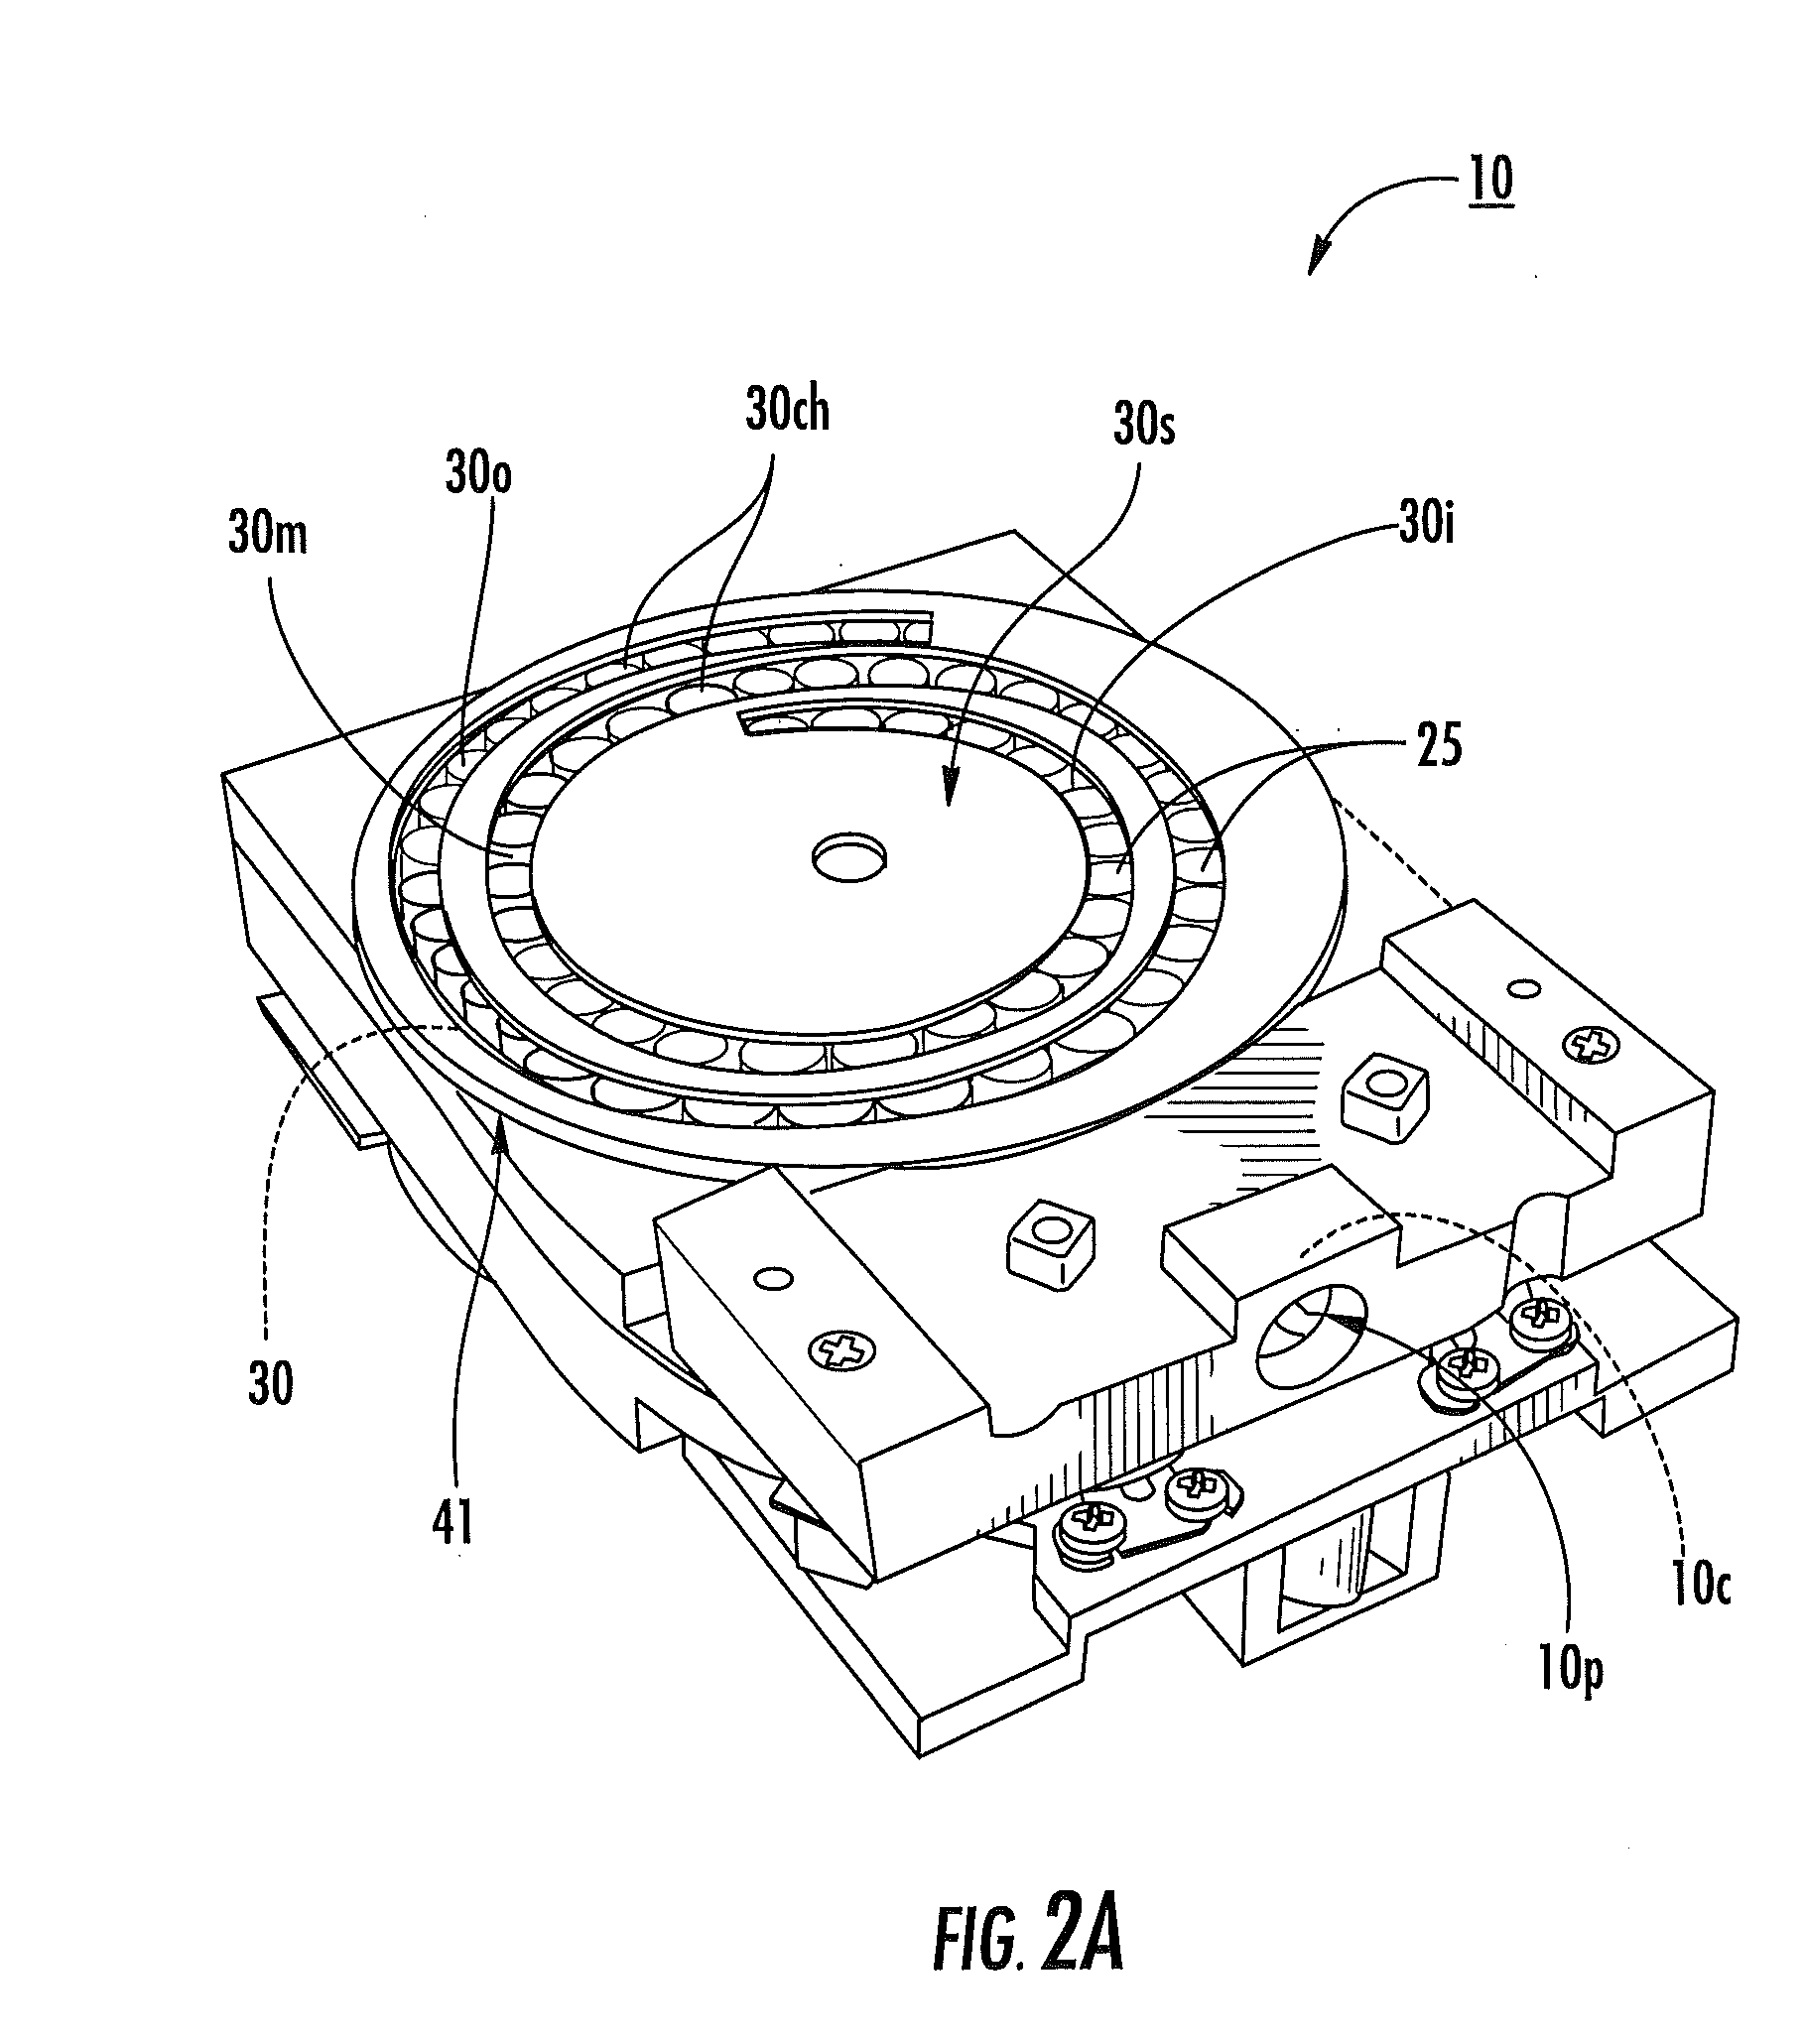 Methods of operating dry powder inhalers having spiral travel paths with microcartridges of dry powder